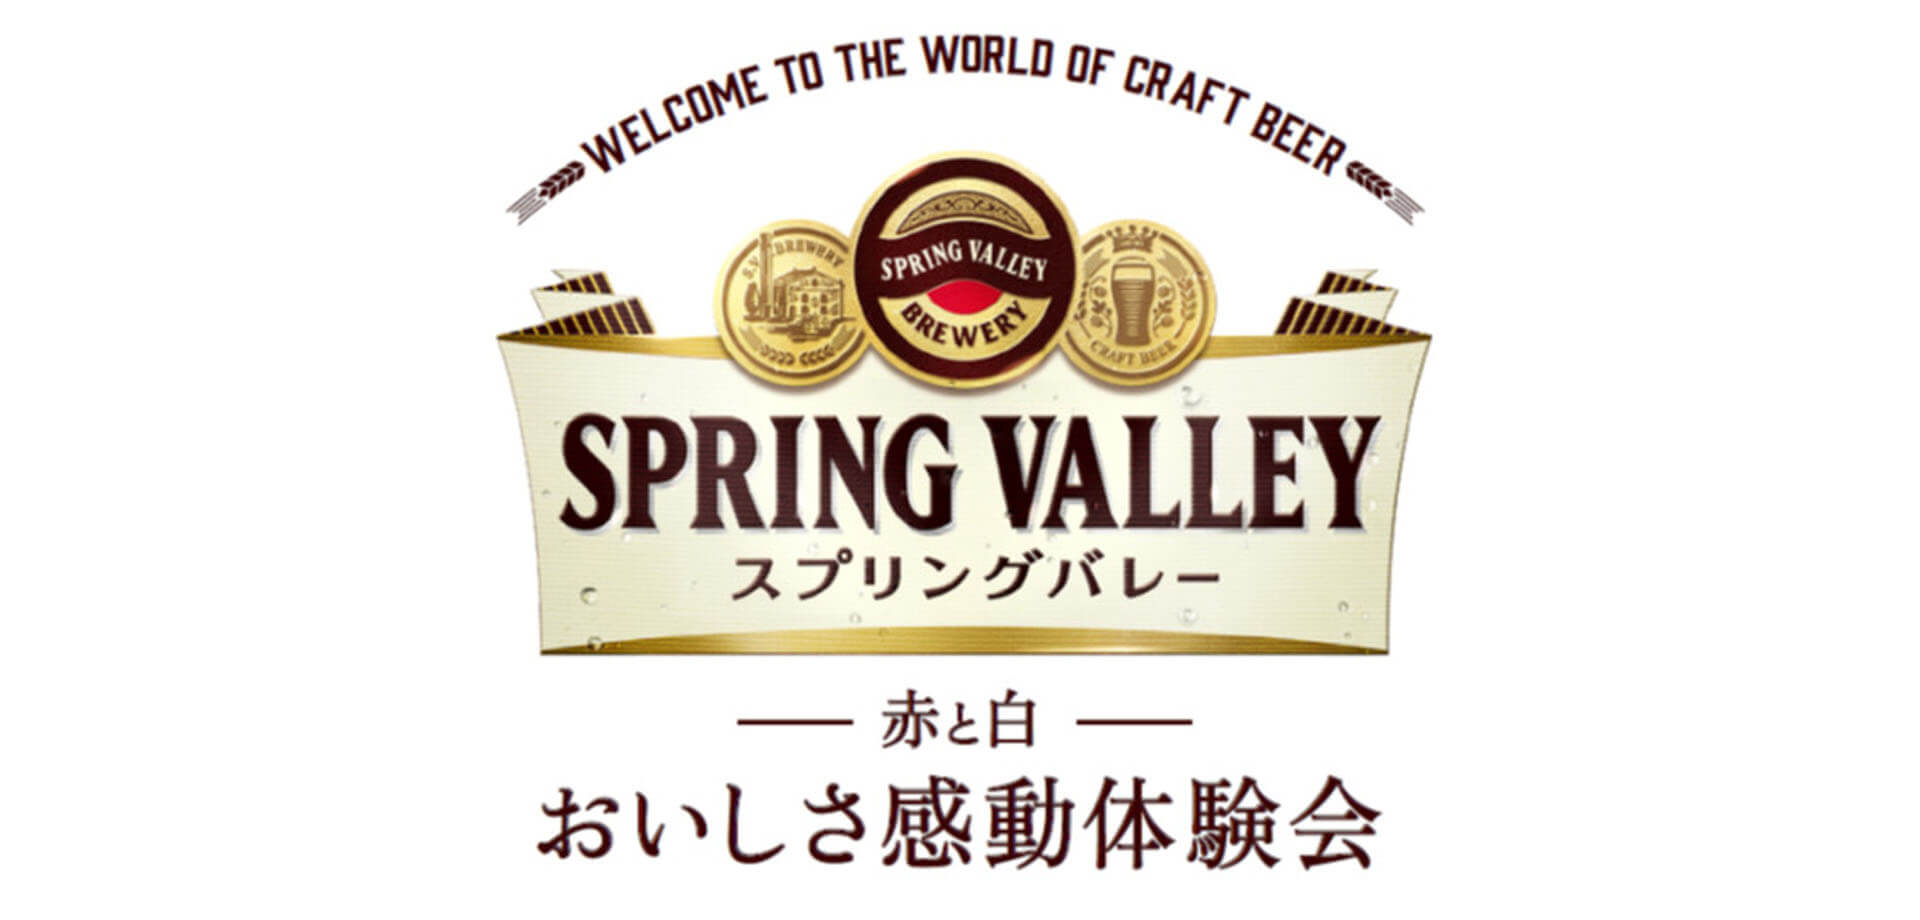 WELCOME TO THE WORLD OF CRAFT BEER　スプリングバレー「赤と白」おいしさ感動体験会 キリンビール